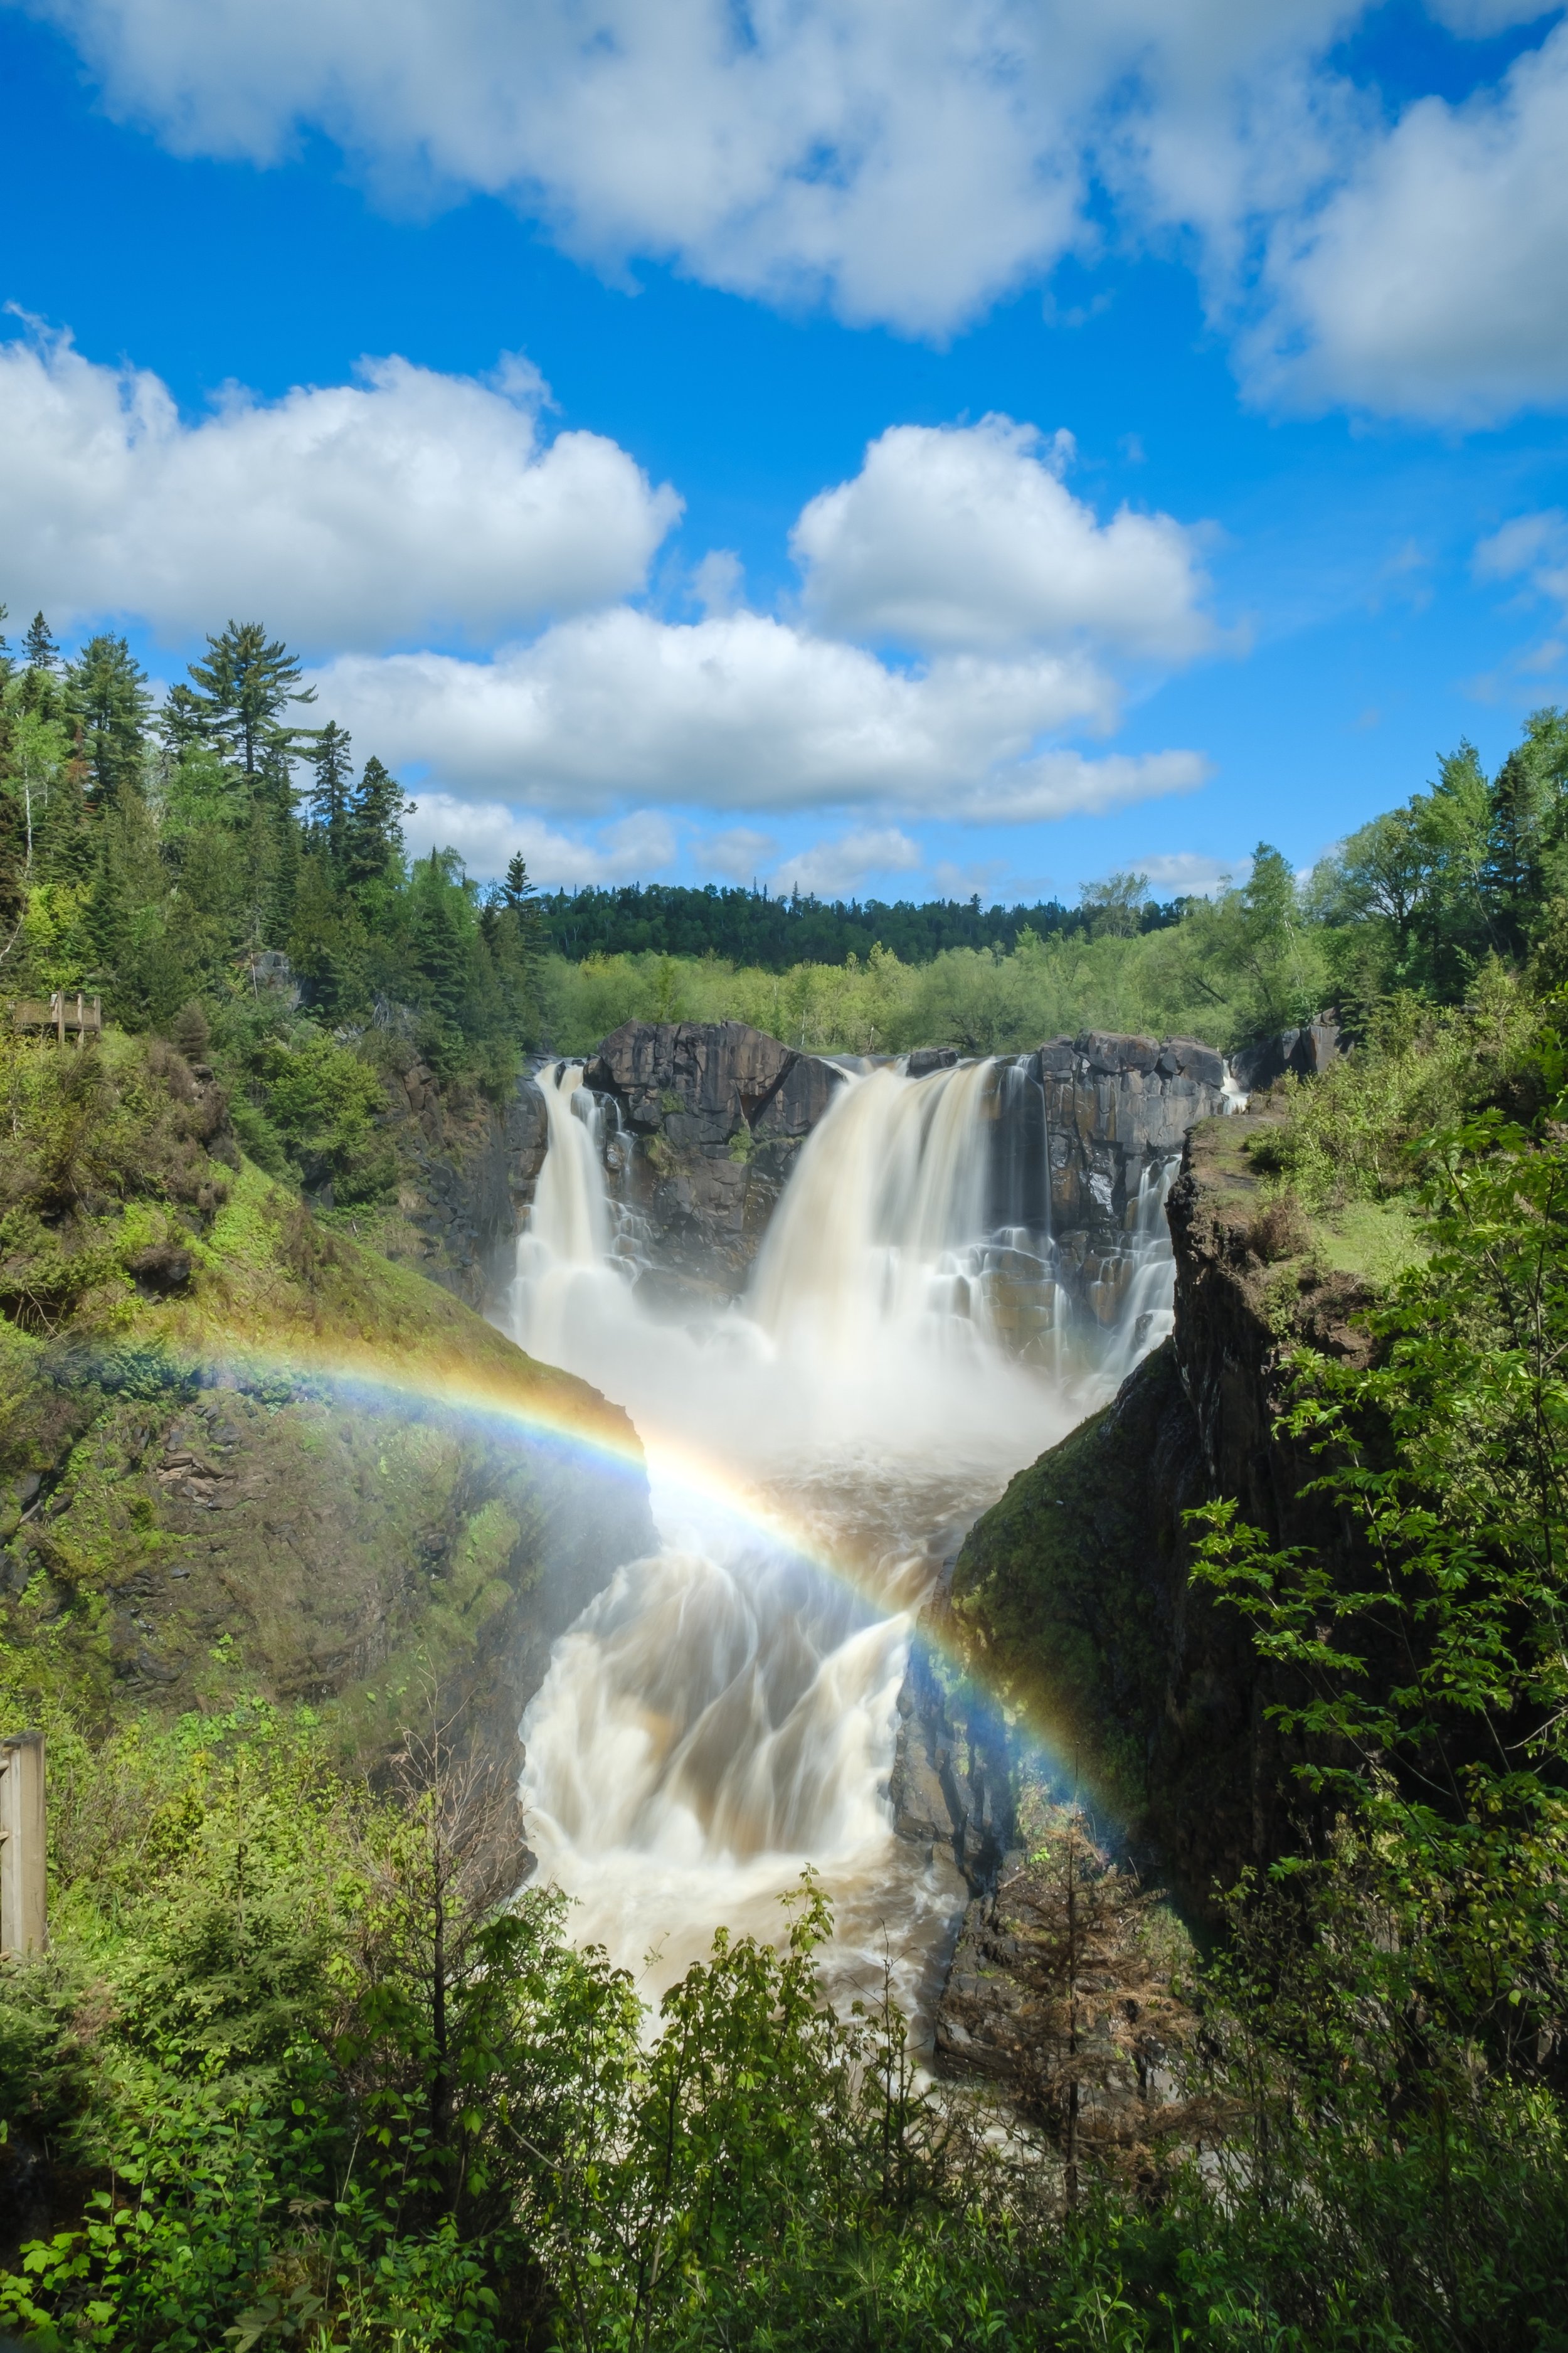  The Grand Portage Waterfall — the largest waterfall in Minnesota.  